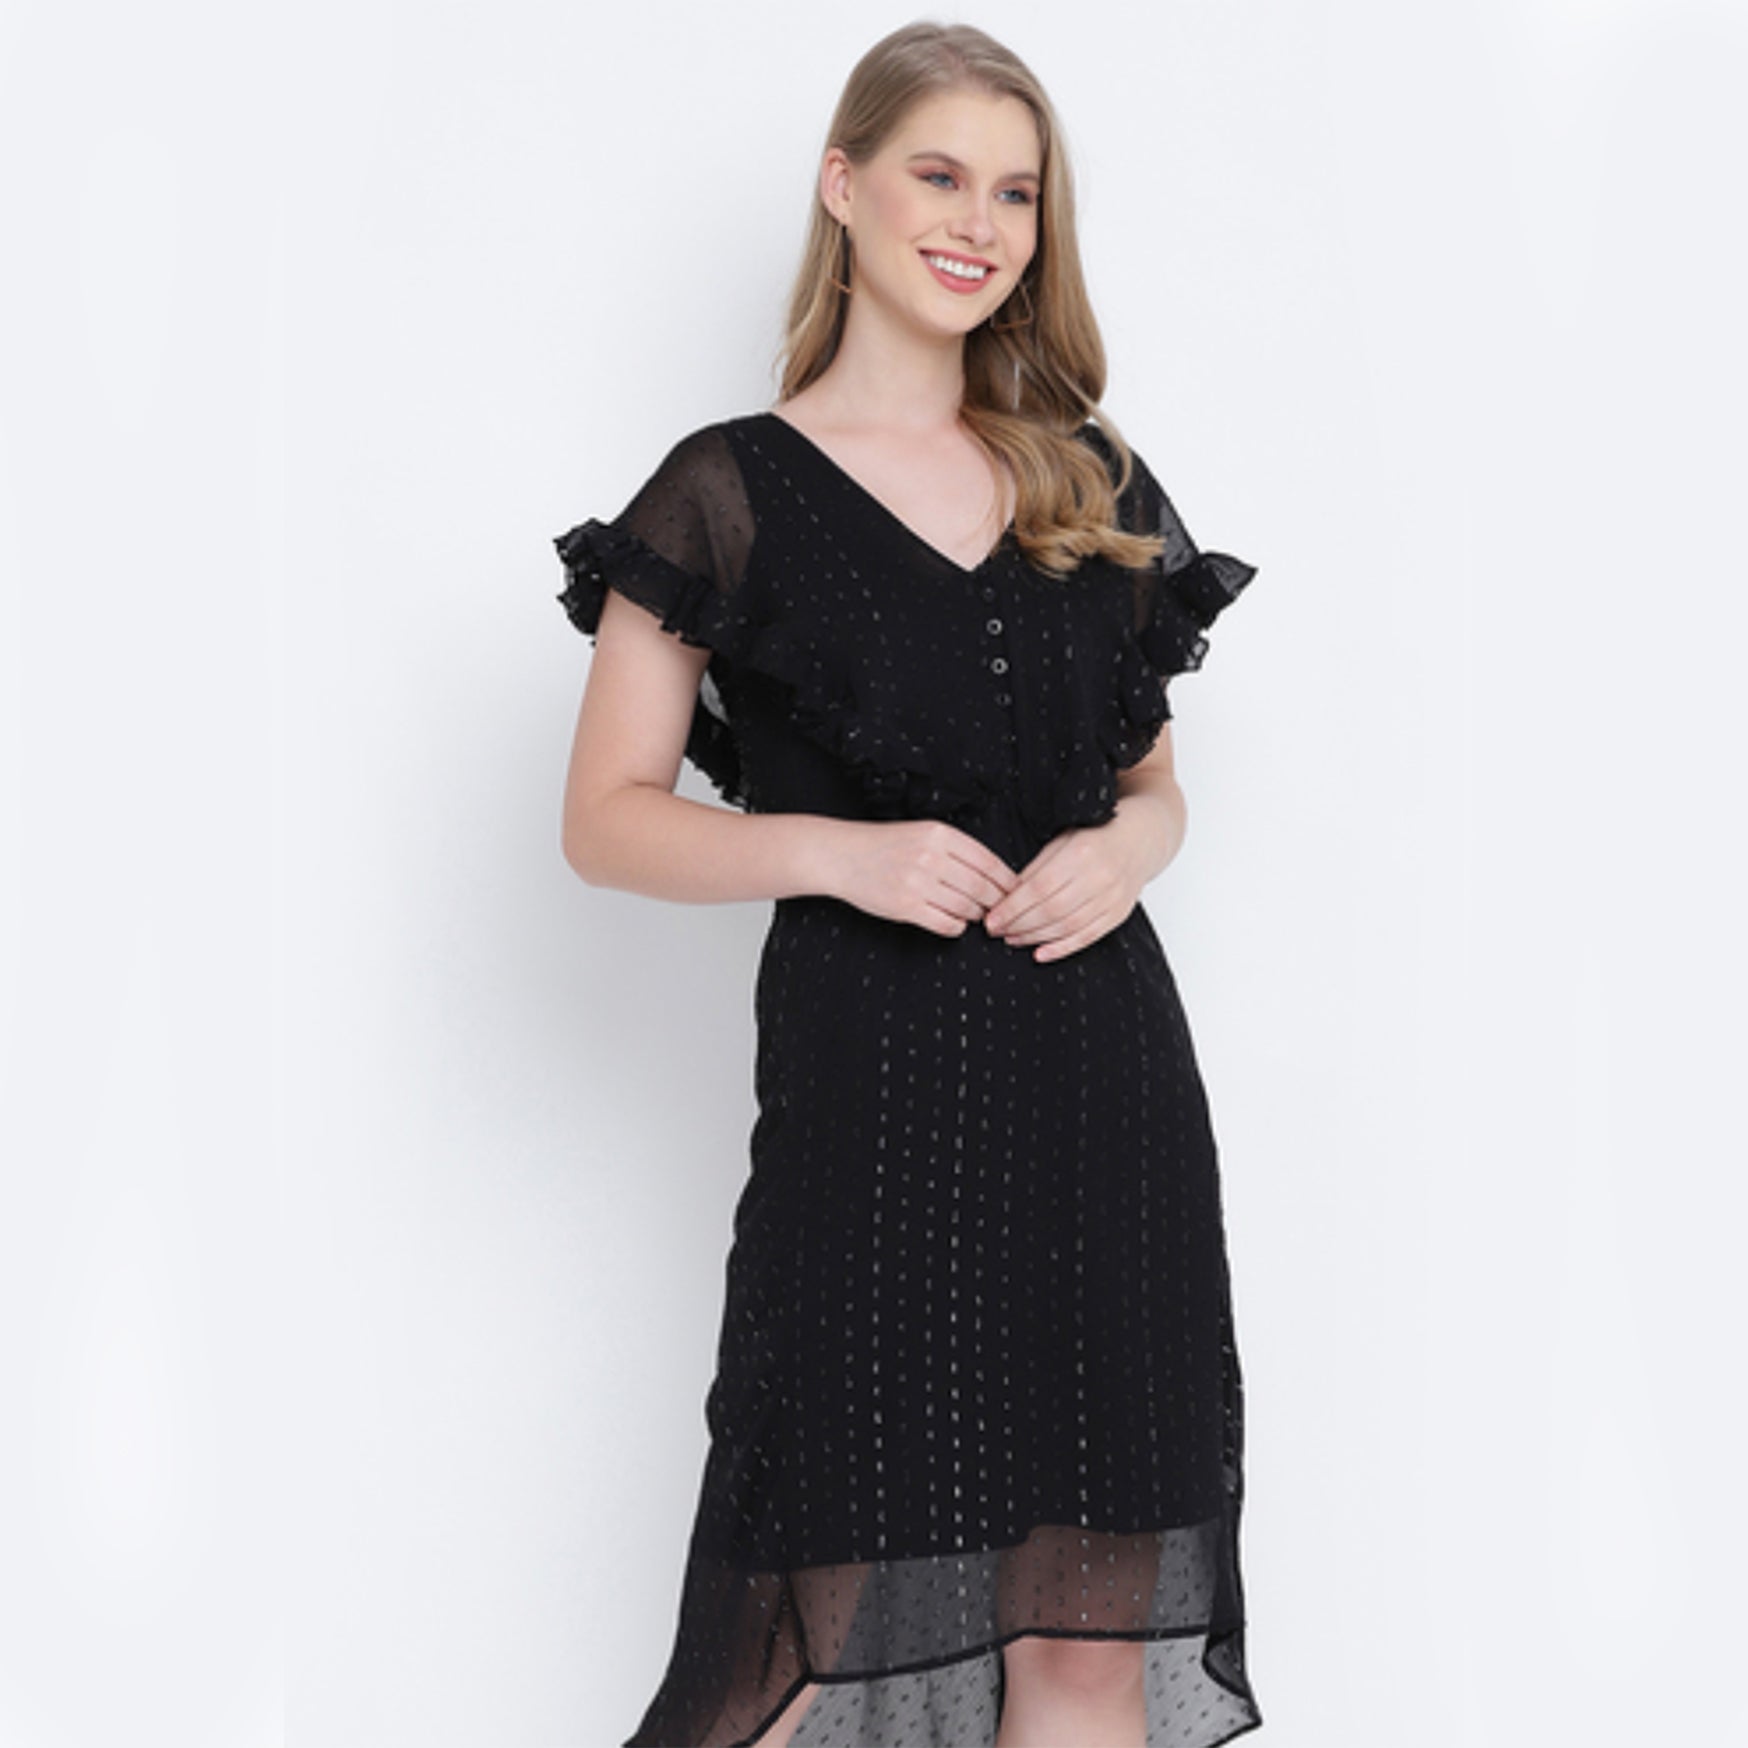 Oxolloxo Black Printed High-Low Dress